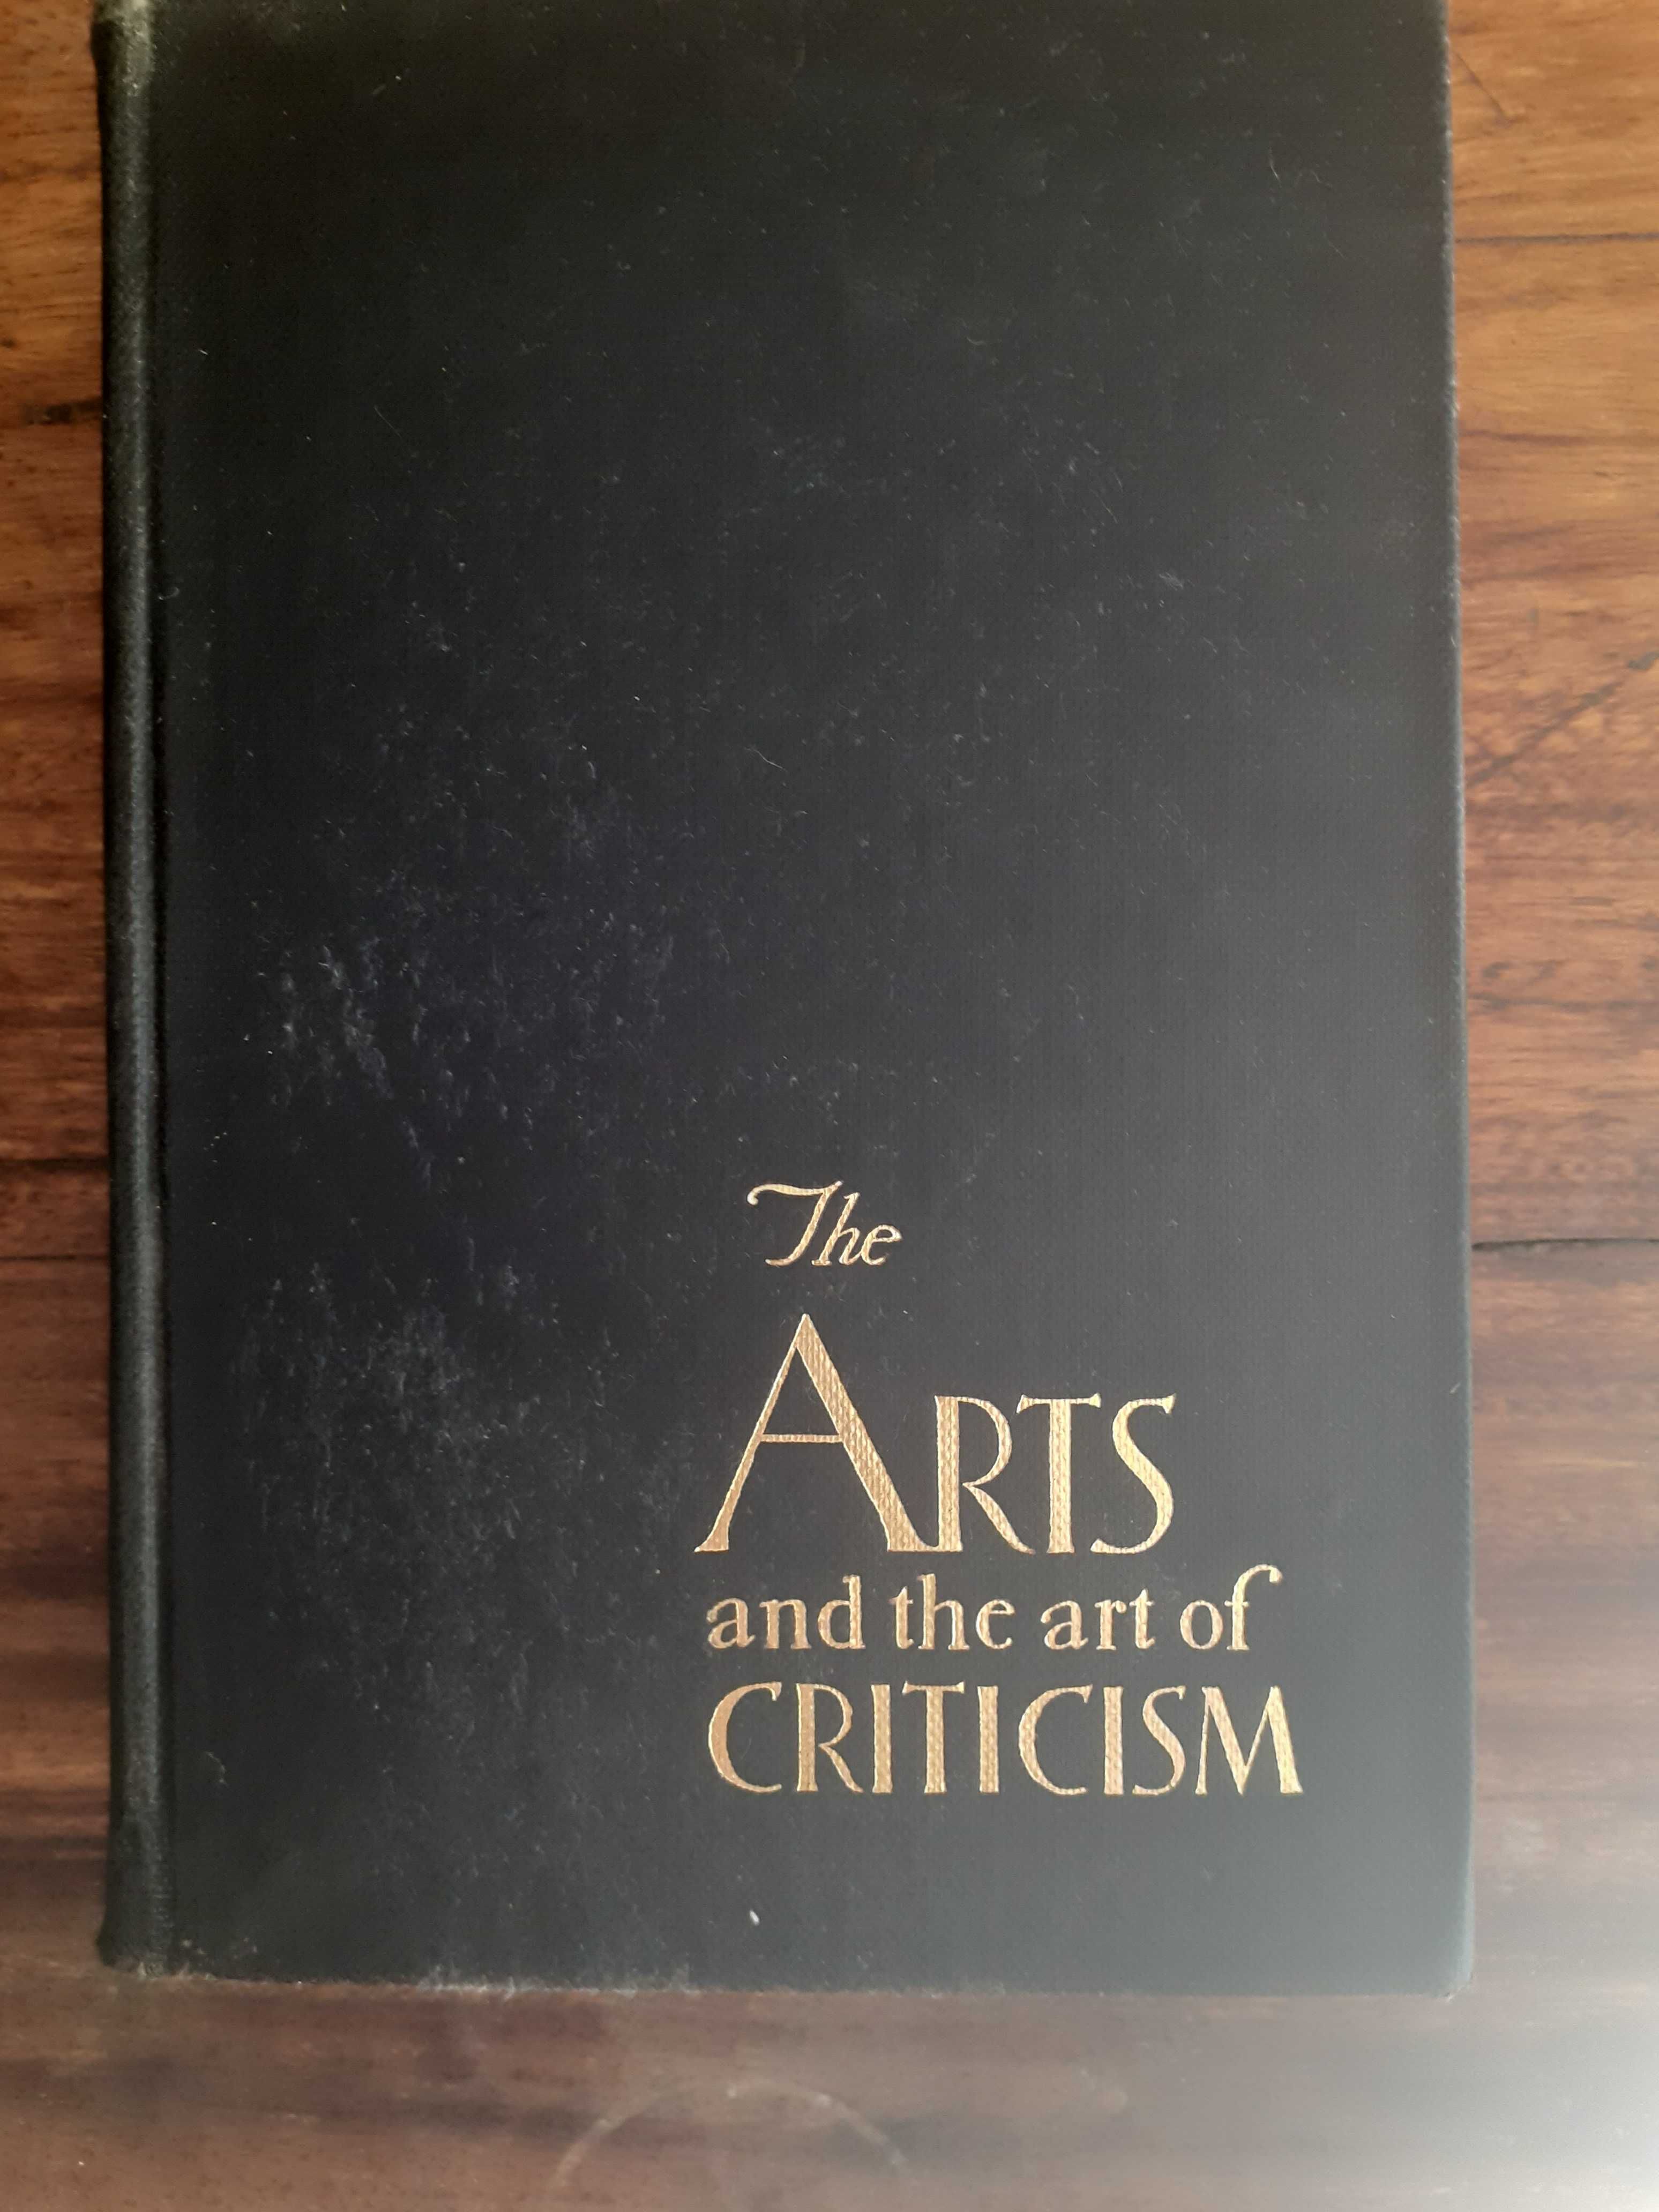 The Arts and the art of criticism